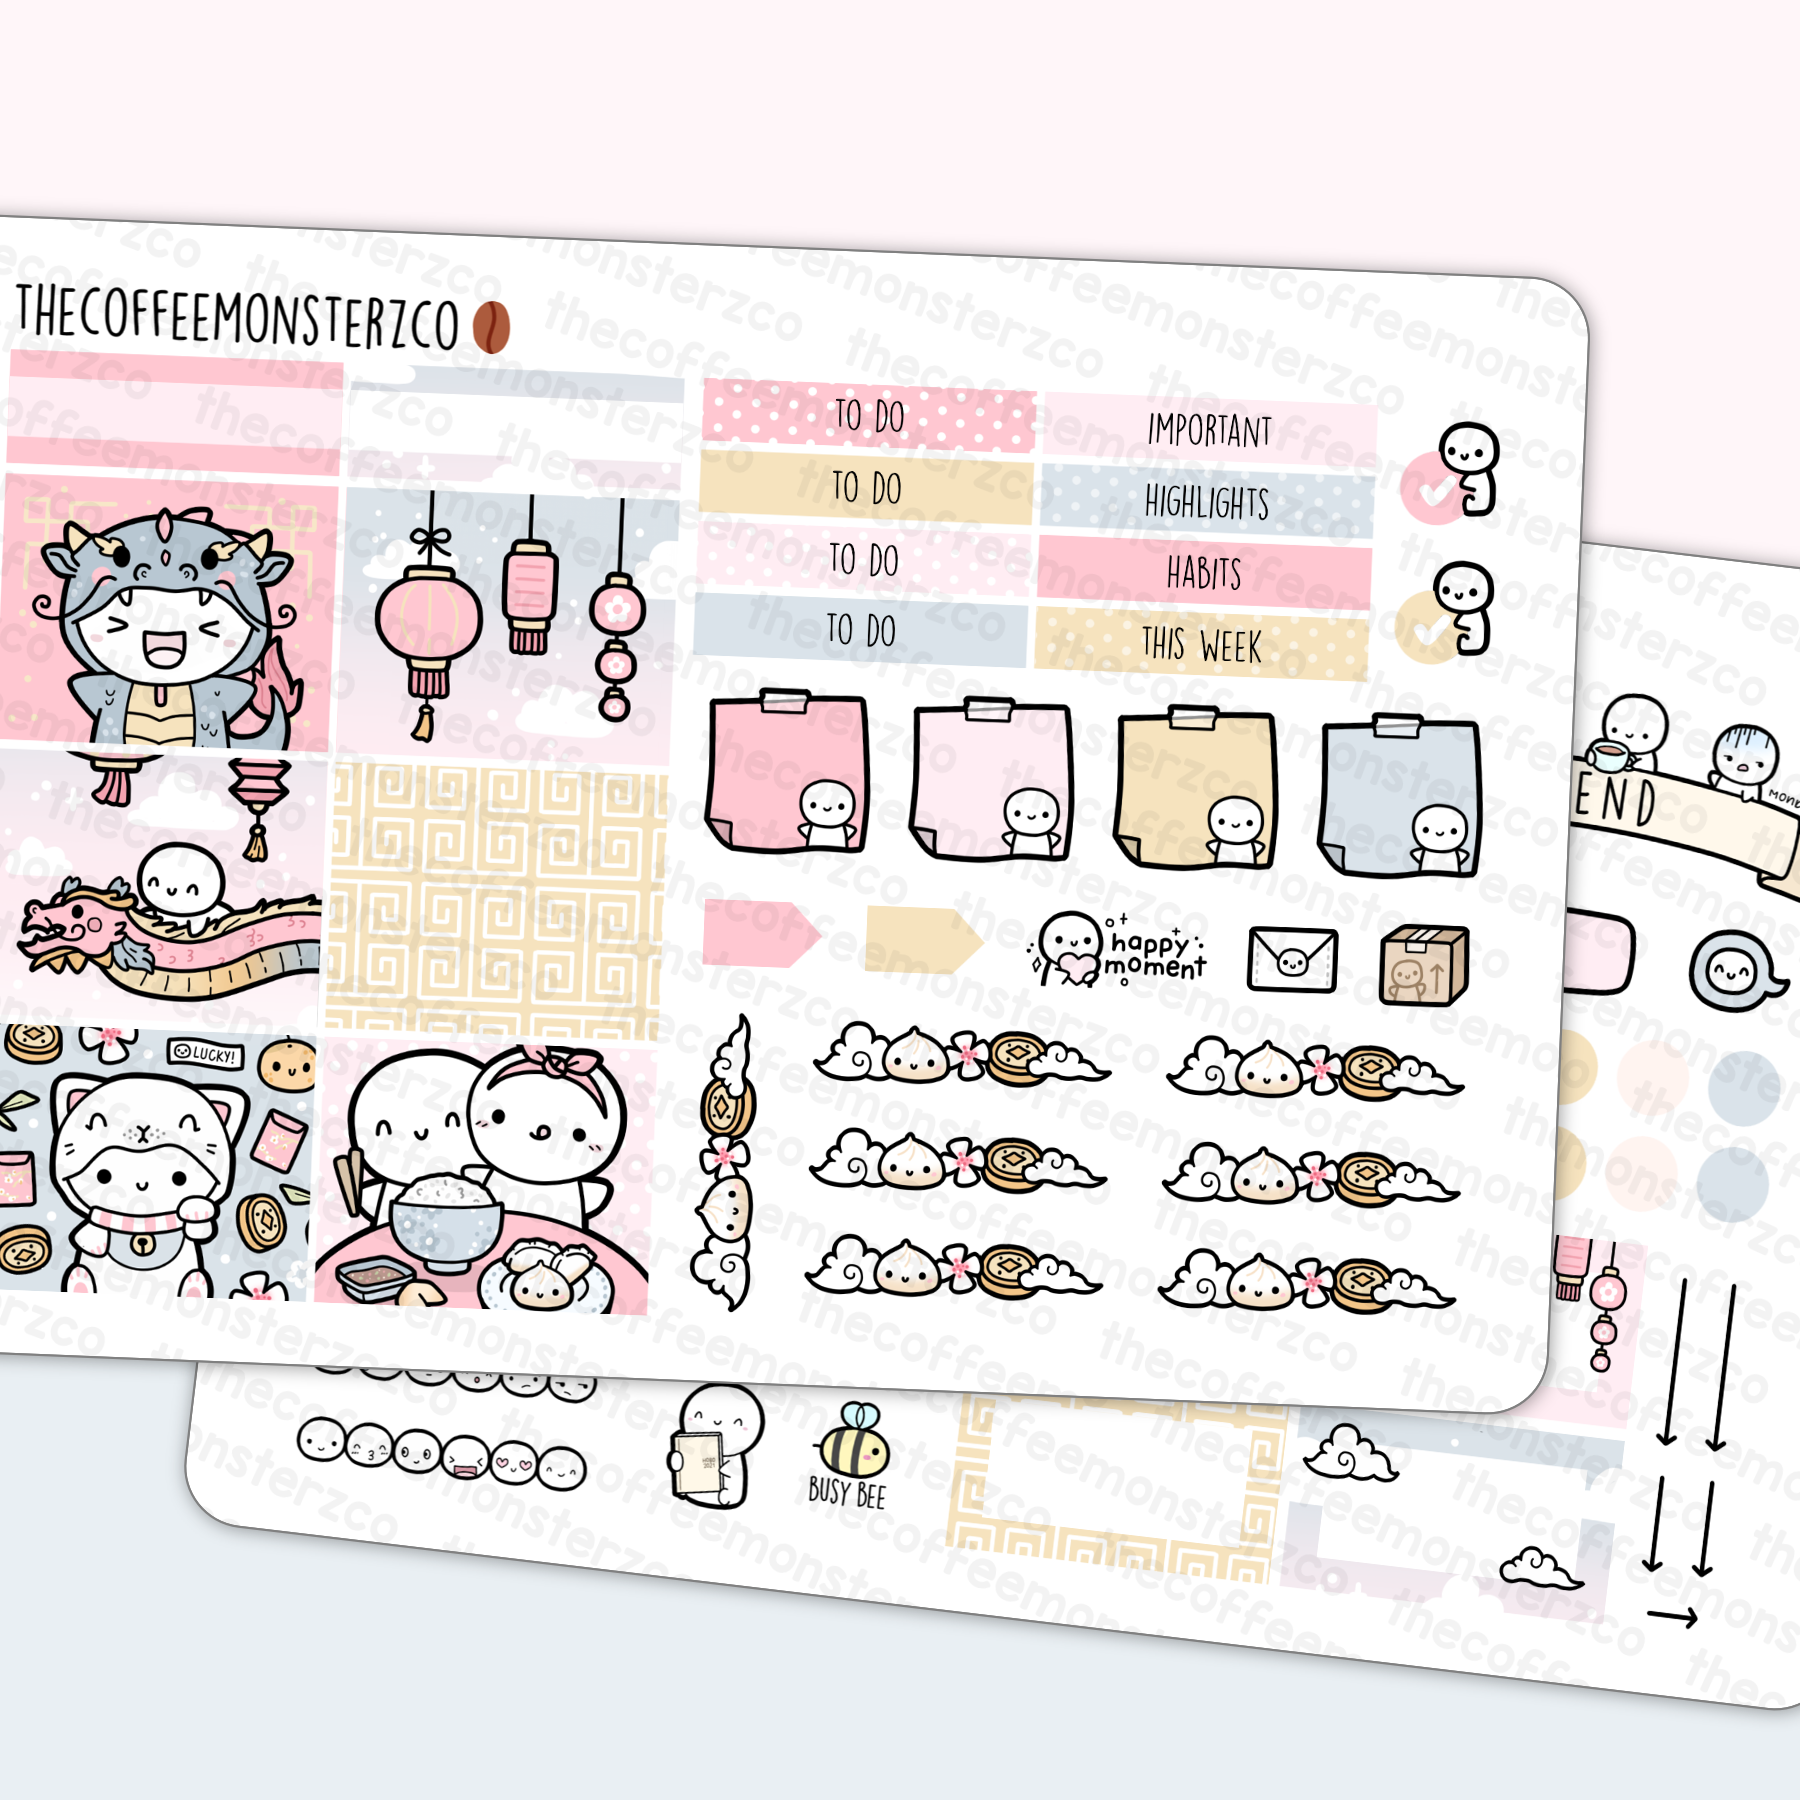 2024 Hobonichi Cousin Yearly View Covers, Year at A Glance A5 Planner  Stickers 